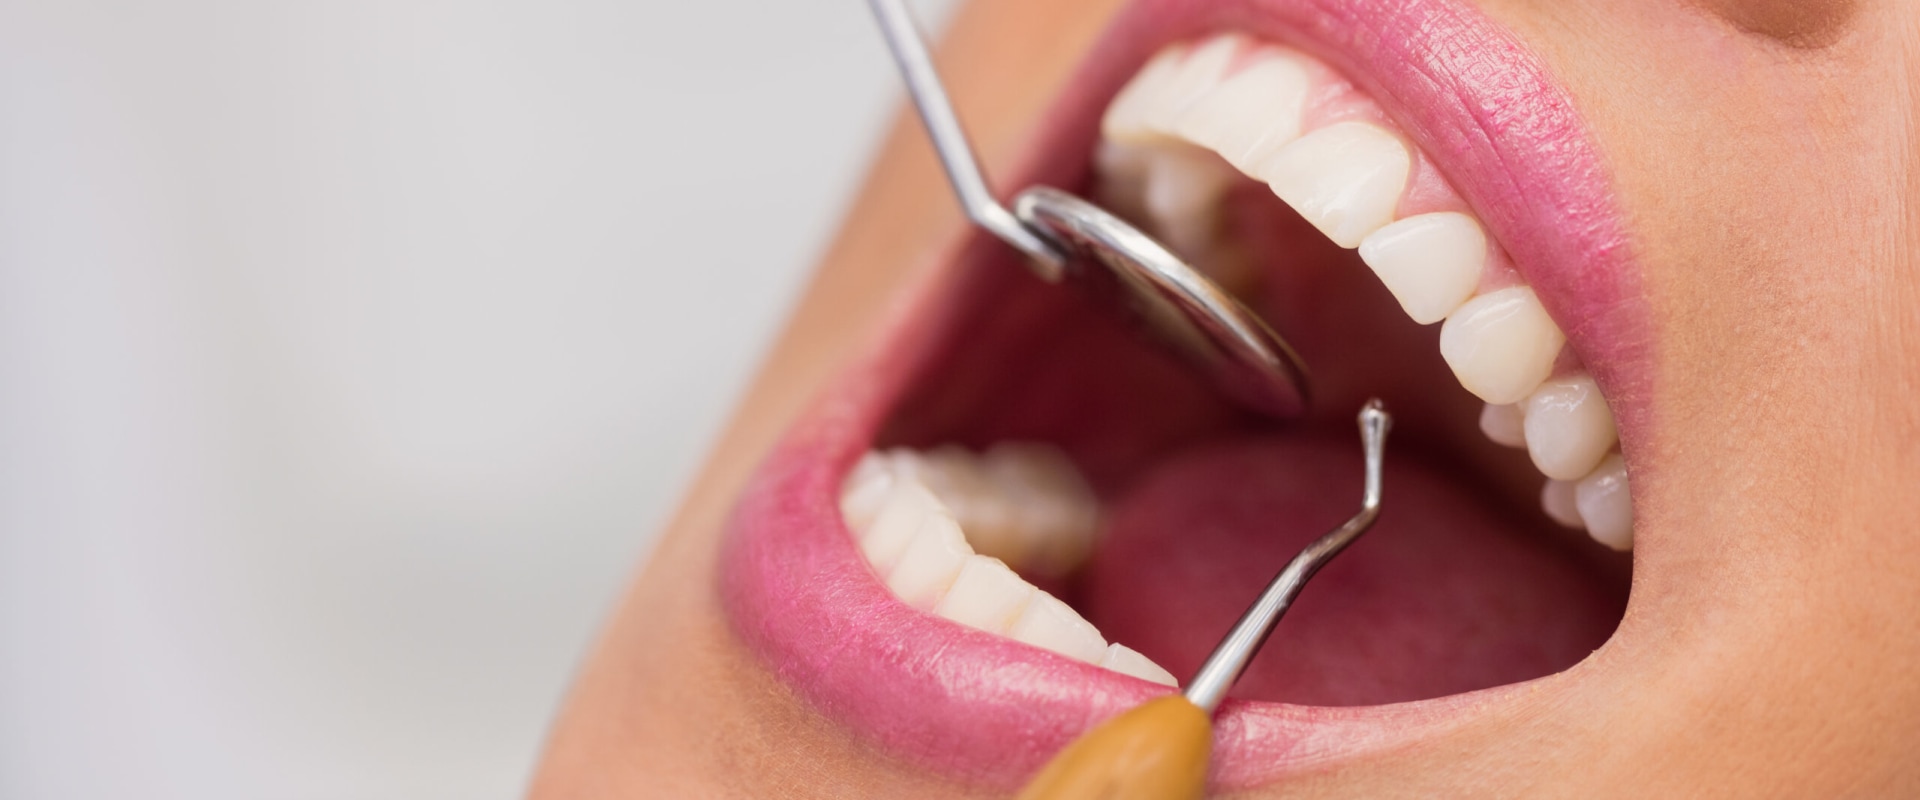 Periodontal Treatments and Procedures: What Do Periodontists Perform?